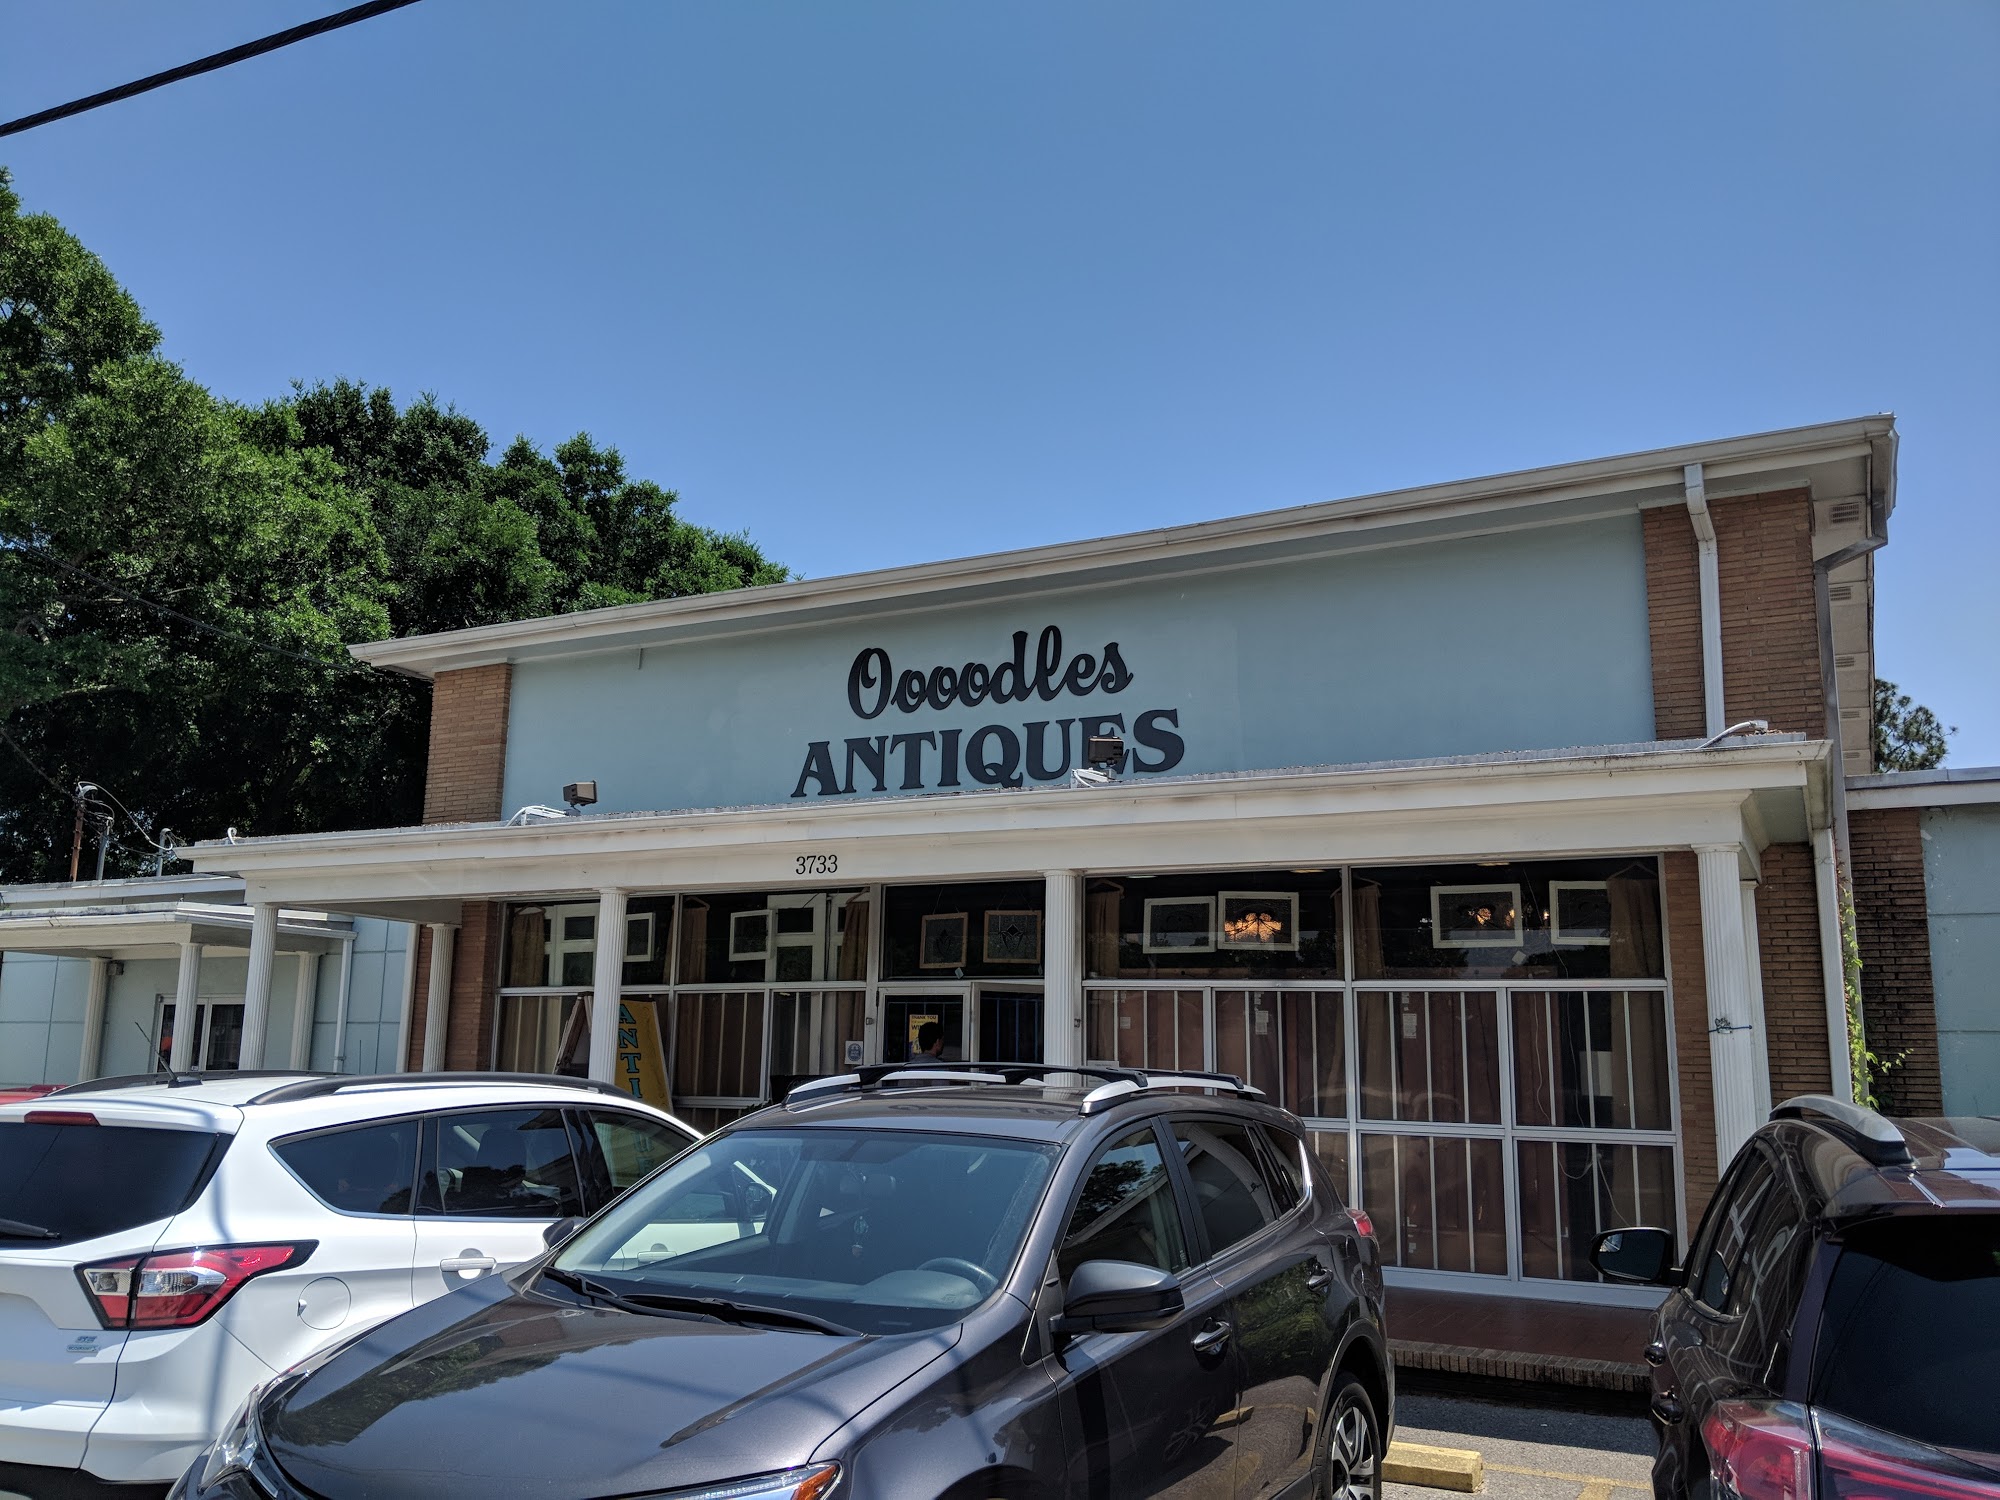 Oooodles Antiques